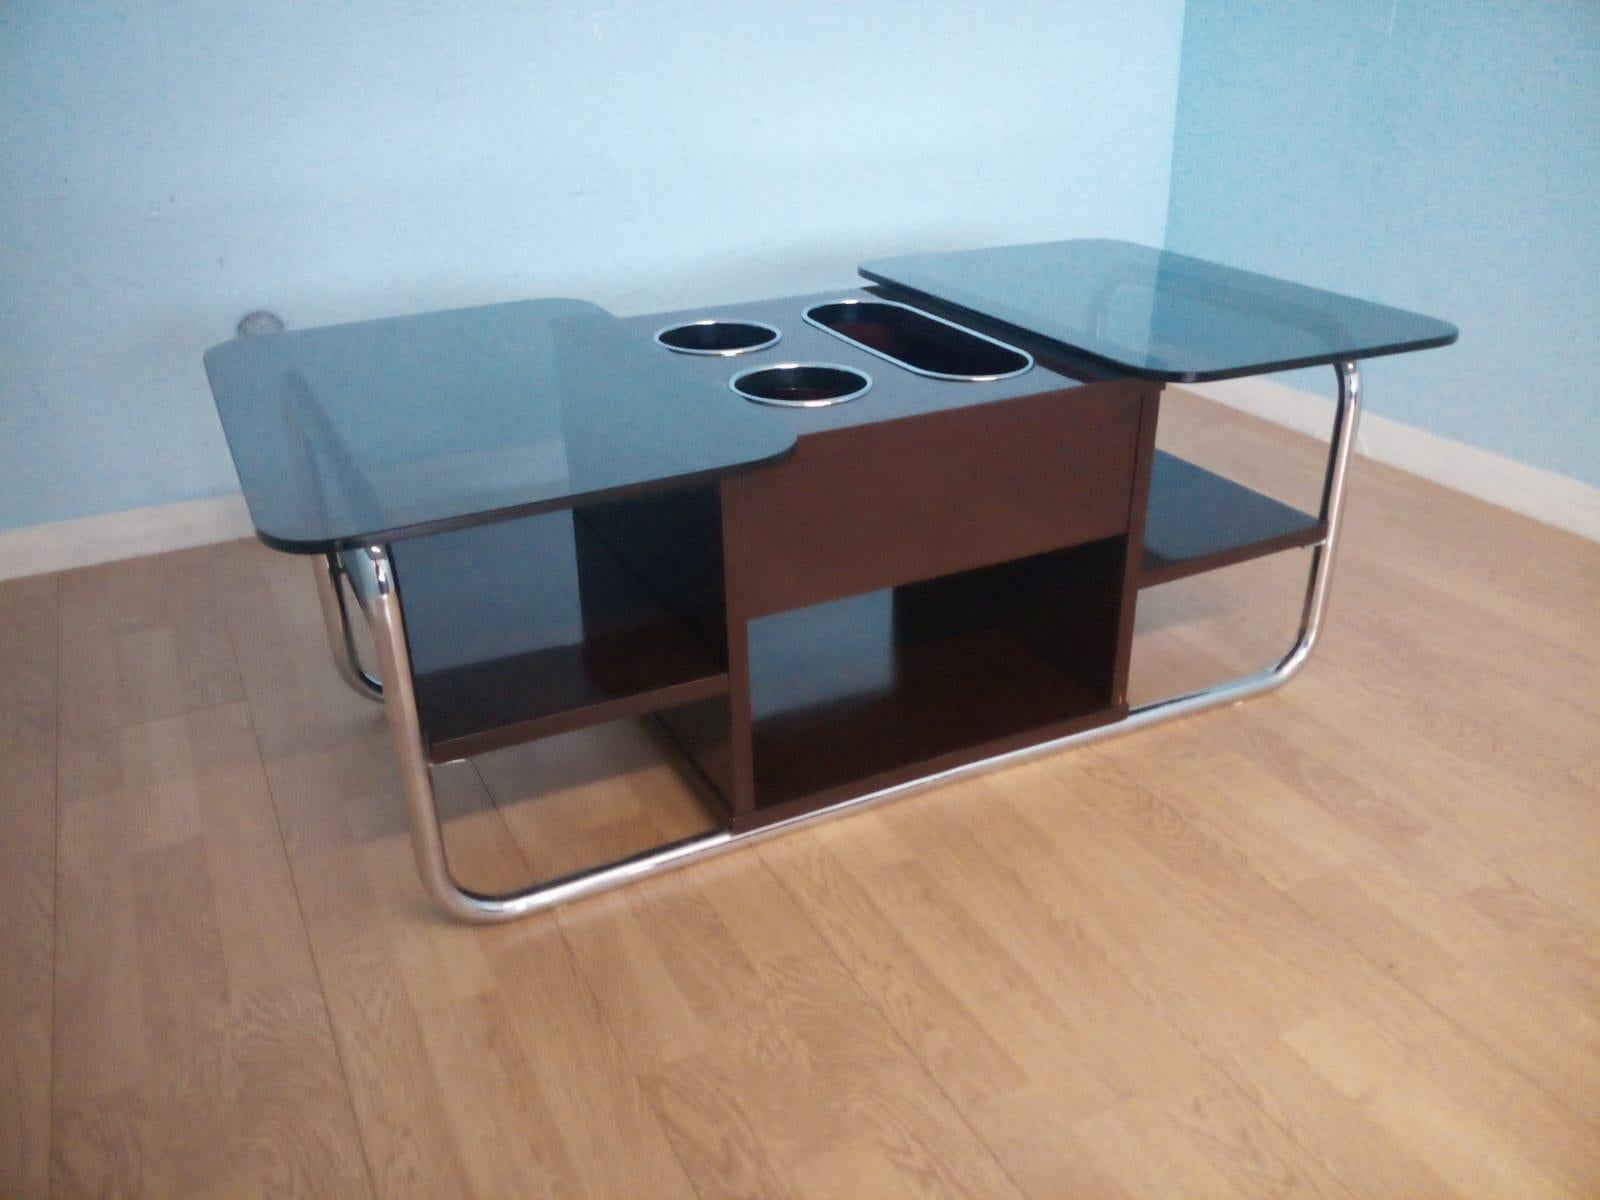 Chrome & Smoked Glass Coffee Table, 1970s Bar Table Design Vintage Industrial For Sale 8